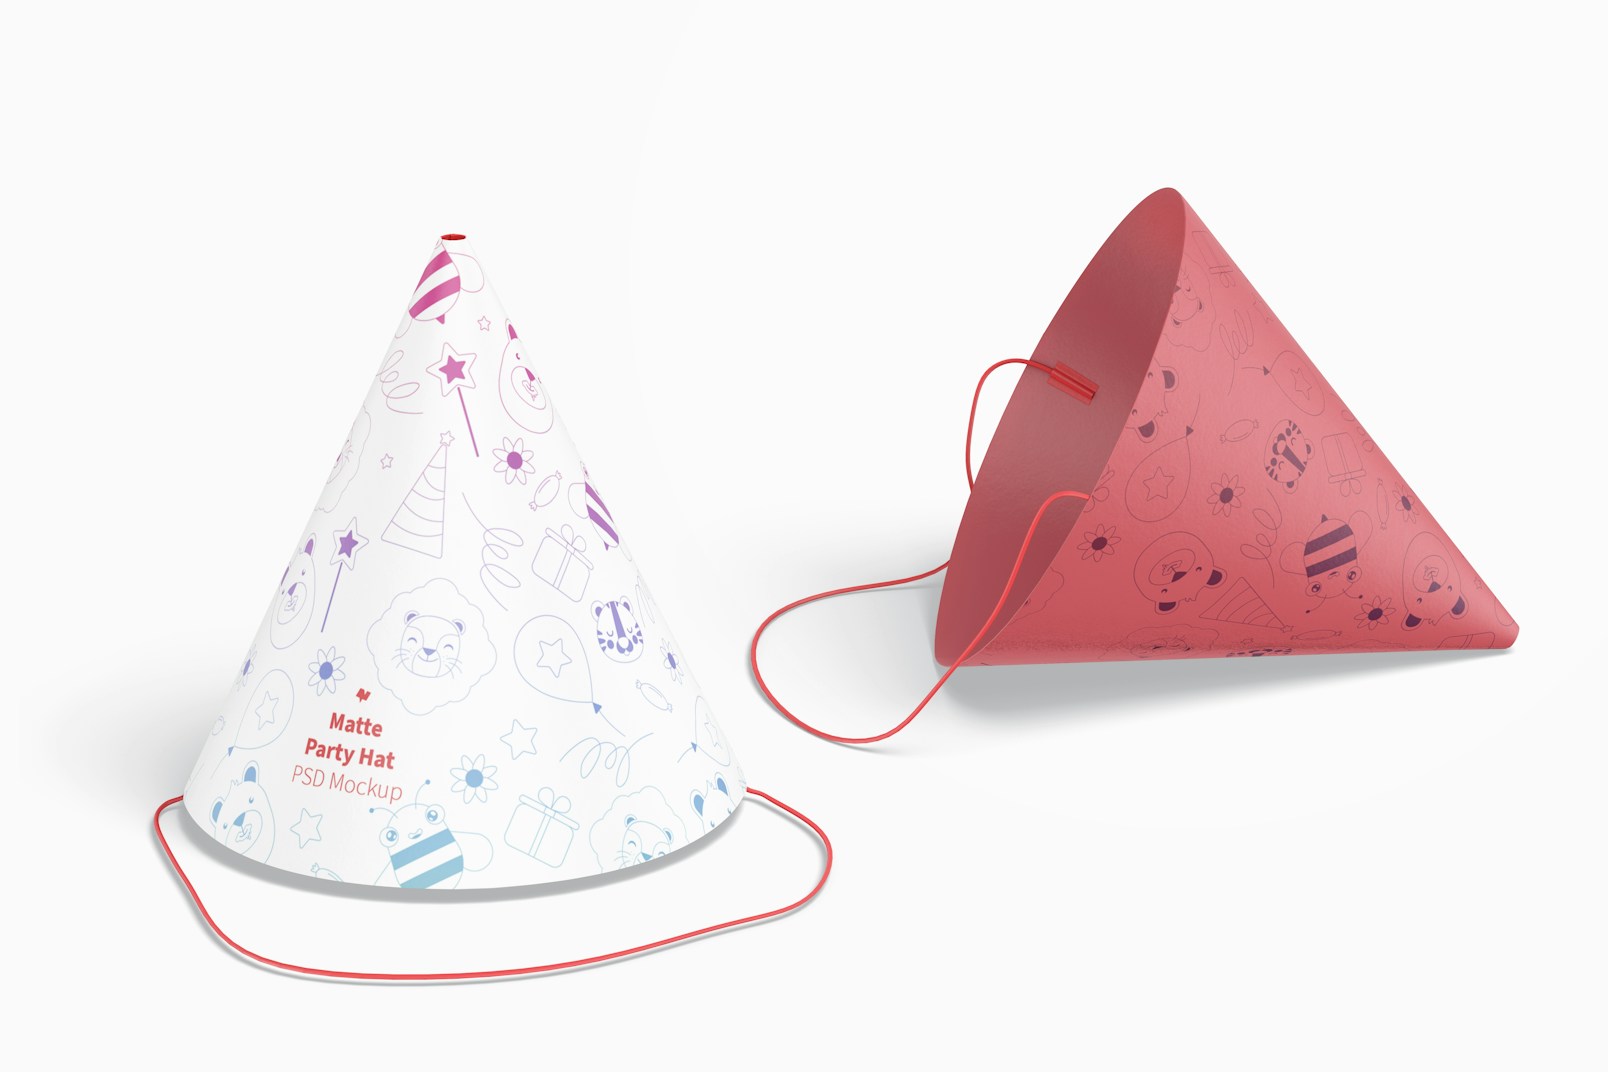 Matte Party Hat Mockup, Standing and Dropped